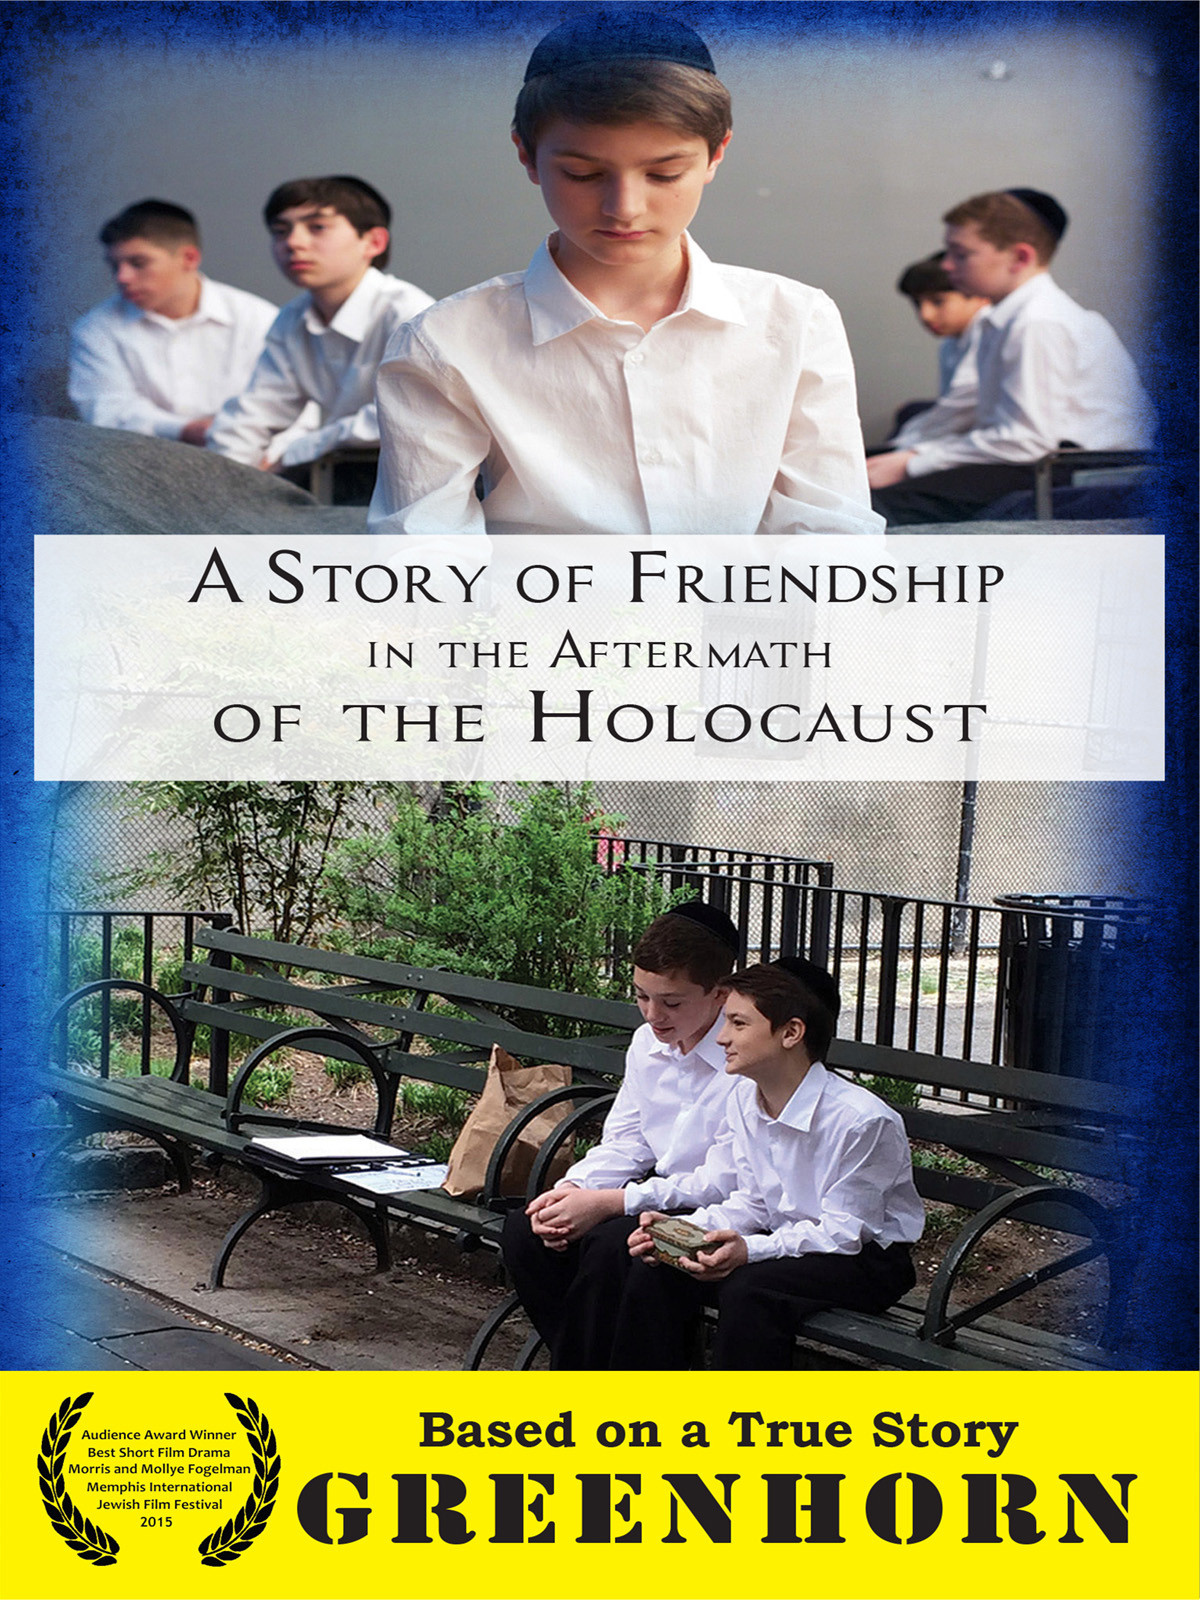 L4812 - Greenhorn - A Story of Friendship in the Aftermath of the Holocaust